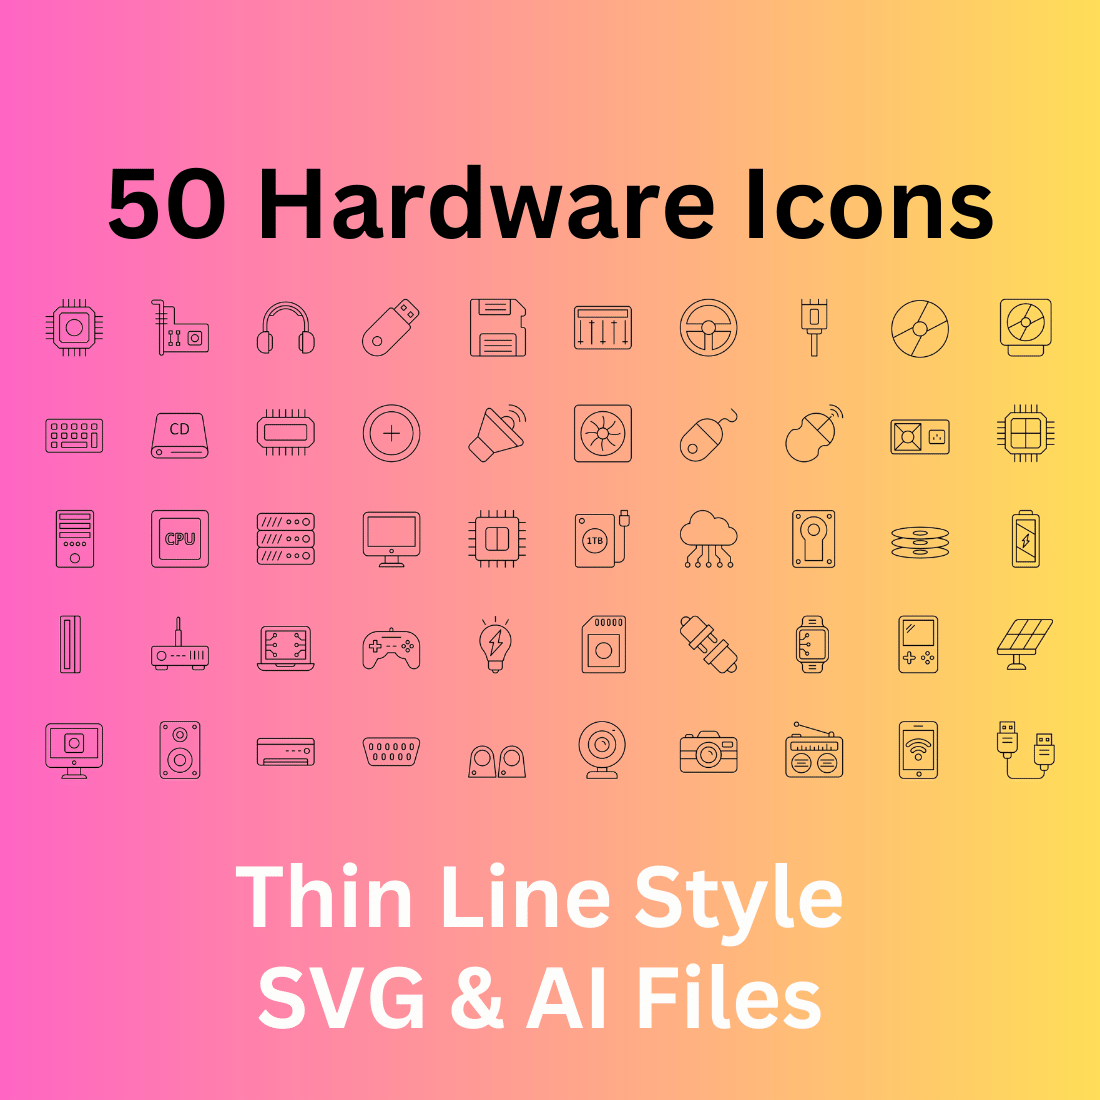 Hardware Set 50 Outline Icons - SVG And AI Files cover image.